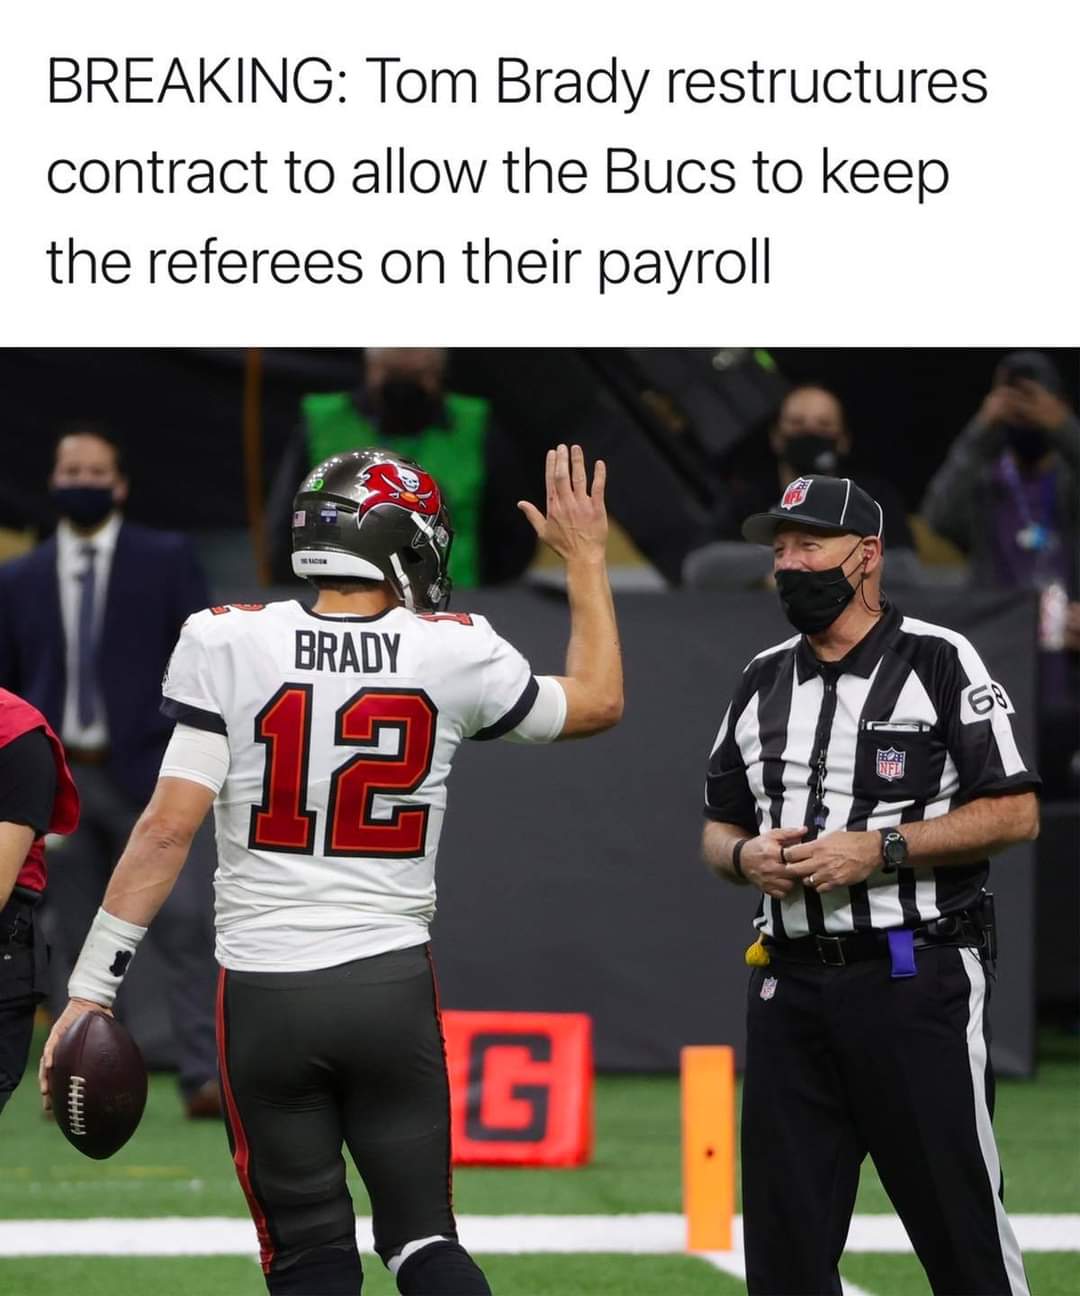 funny memes and random pics - tom brady high five denied - Breaking Tom Brady restructures contract to allow the Bucs to keep the referees on their payroll Sis Brady 12 Va Hhh G